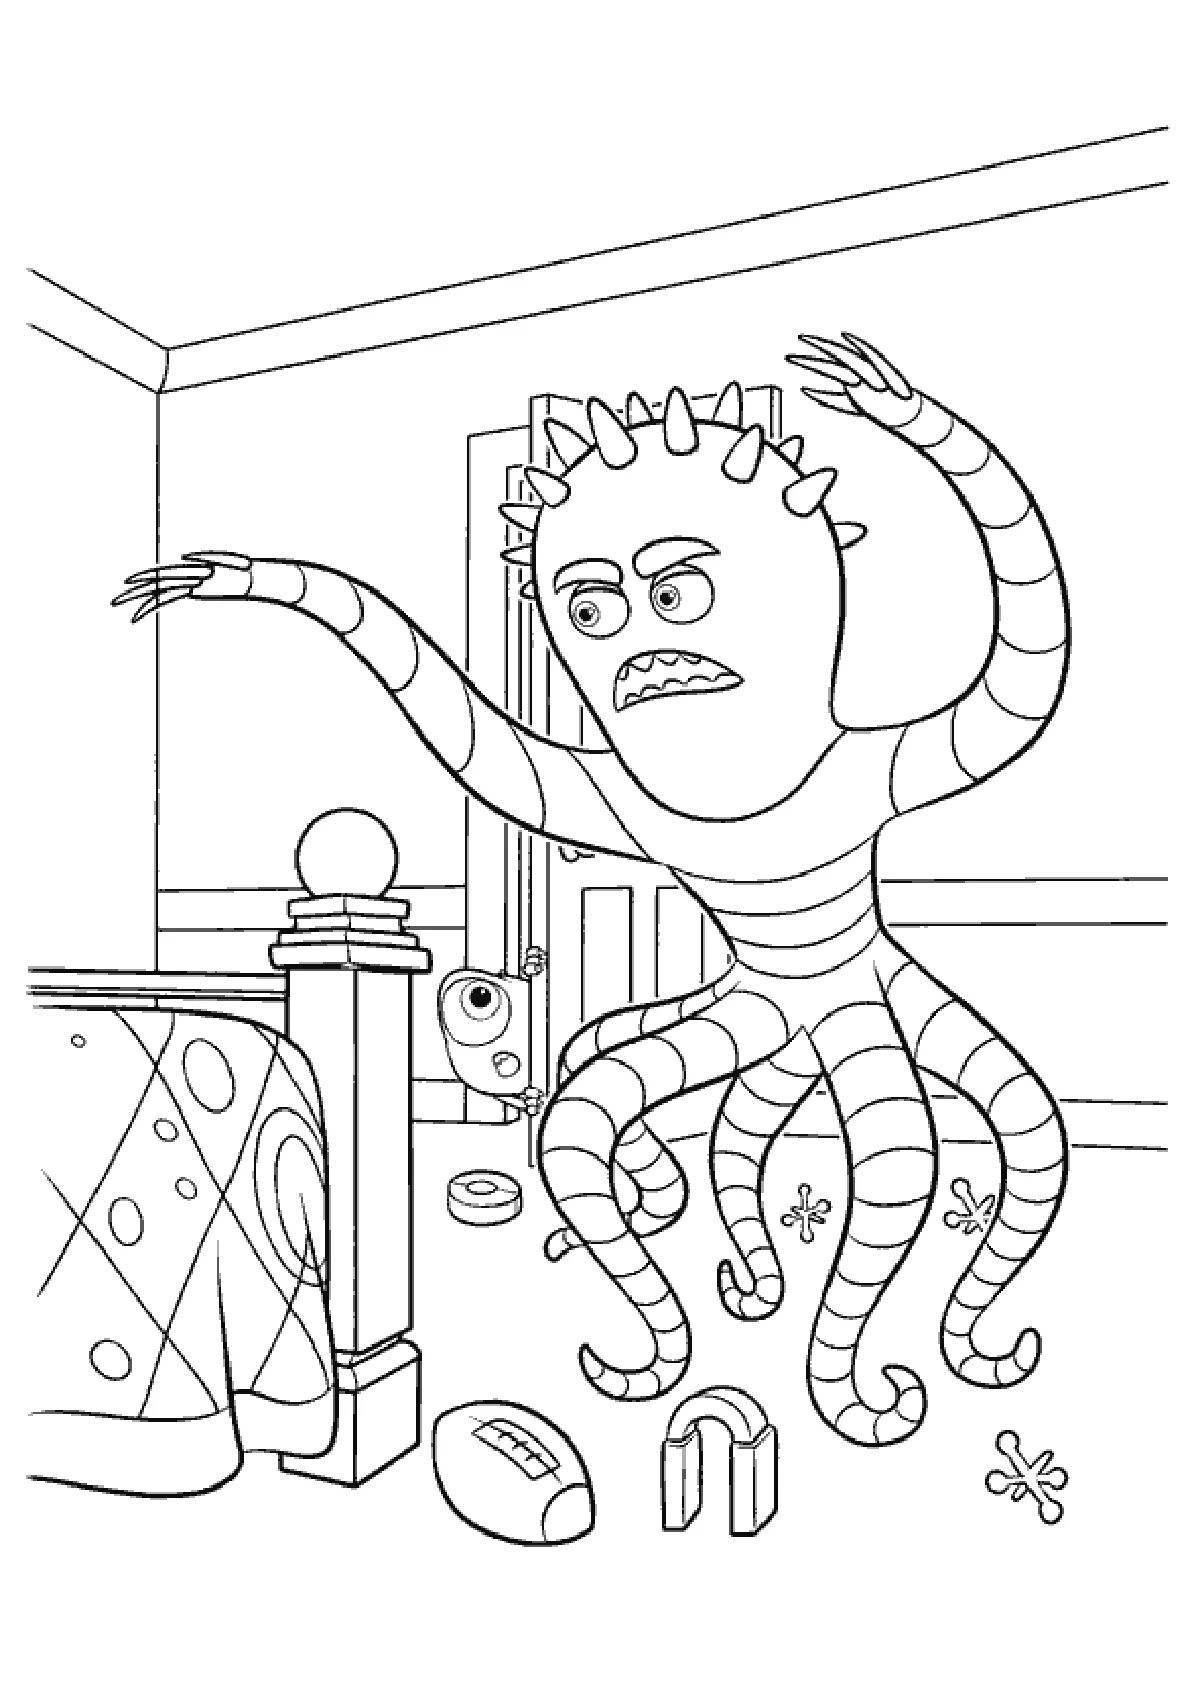 Hairy coloring monsters from the door